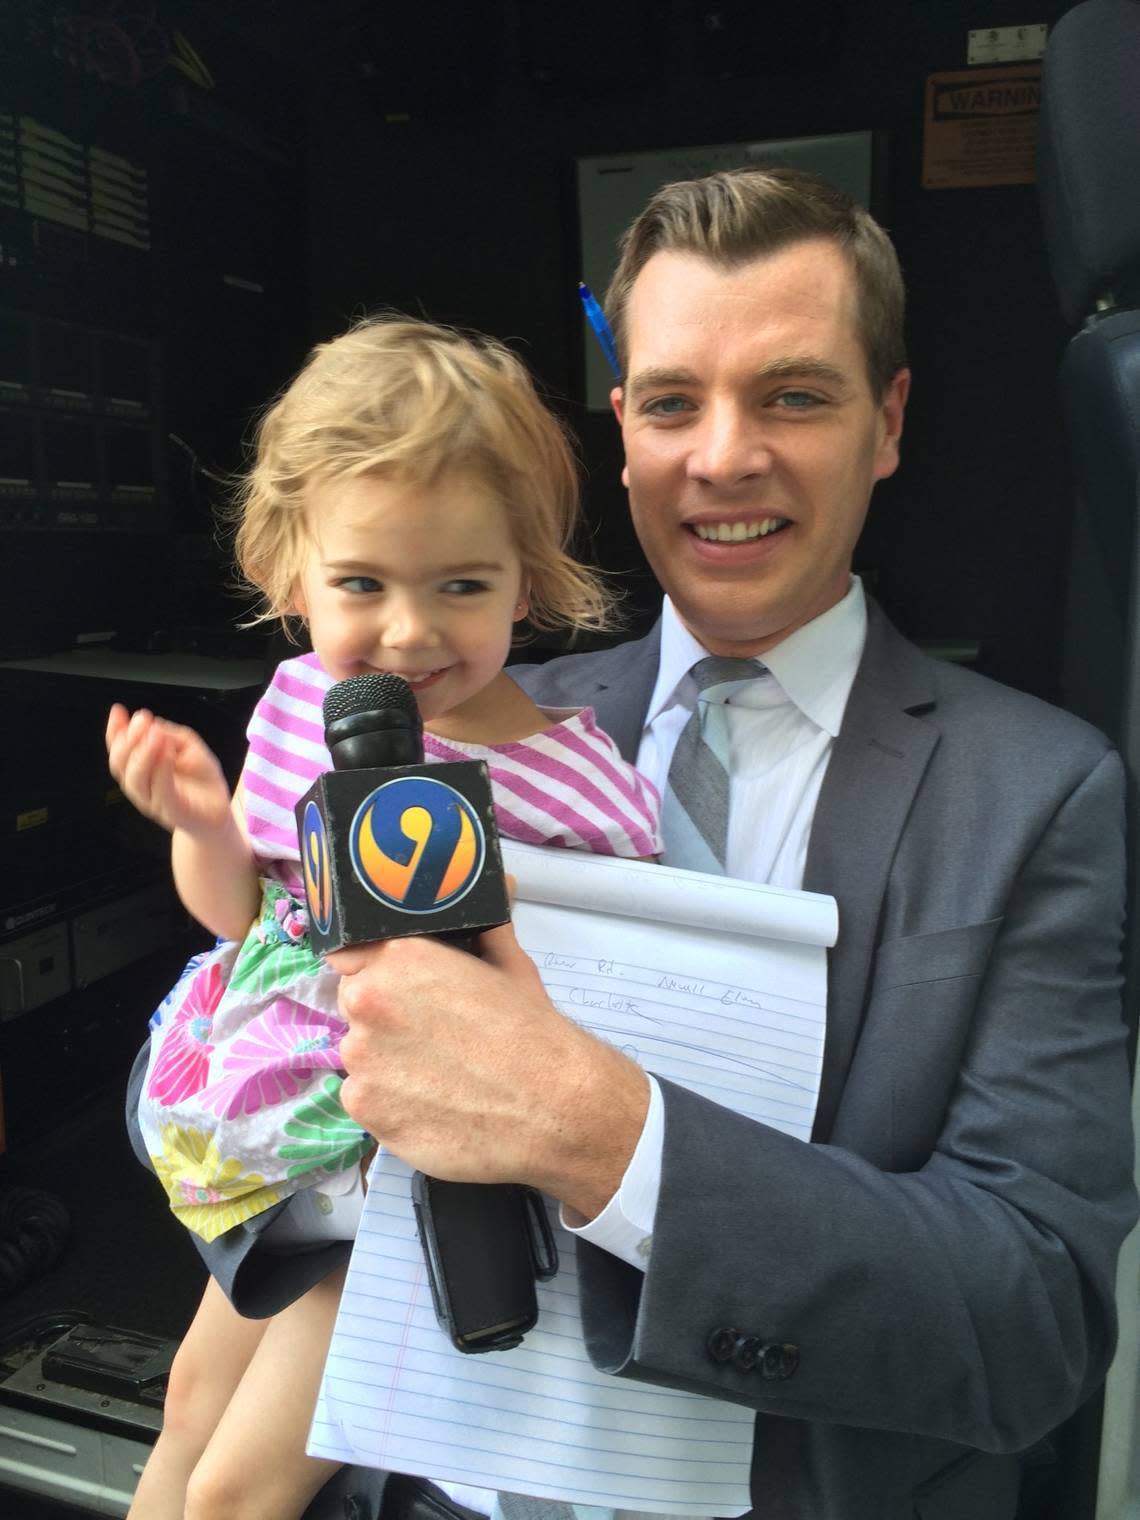 John Paul holds a microphone for one of his daughters not long after he joined WSOC-TV Channel 9 in Charlotte, NC, in 2015. Paul announced on July 25, 2022, that he will be leaving the station for a job in Philadelphia.